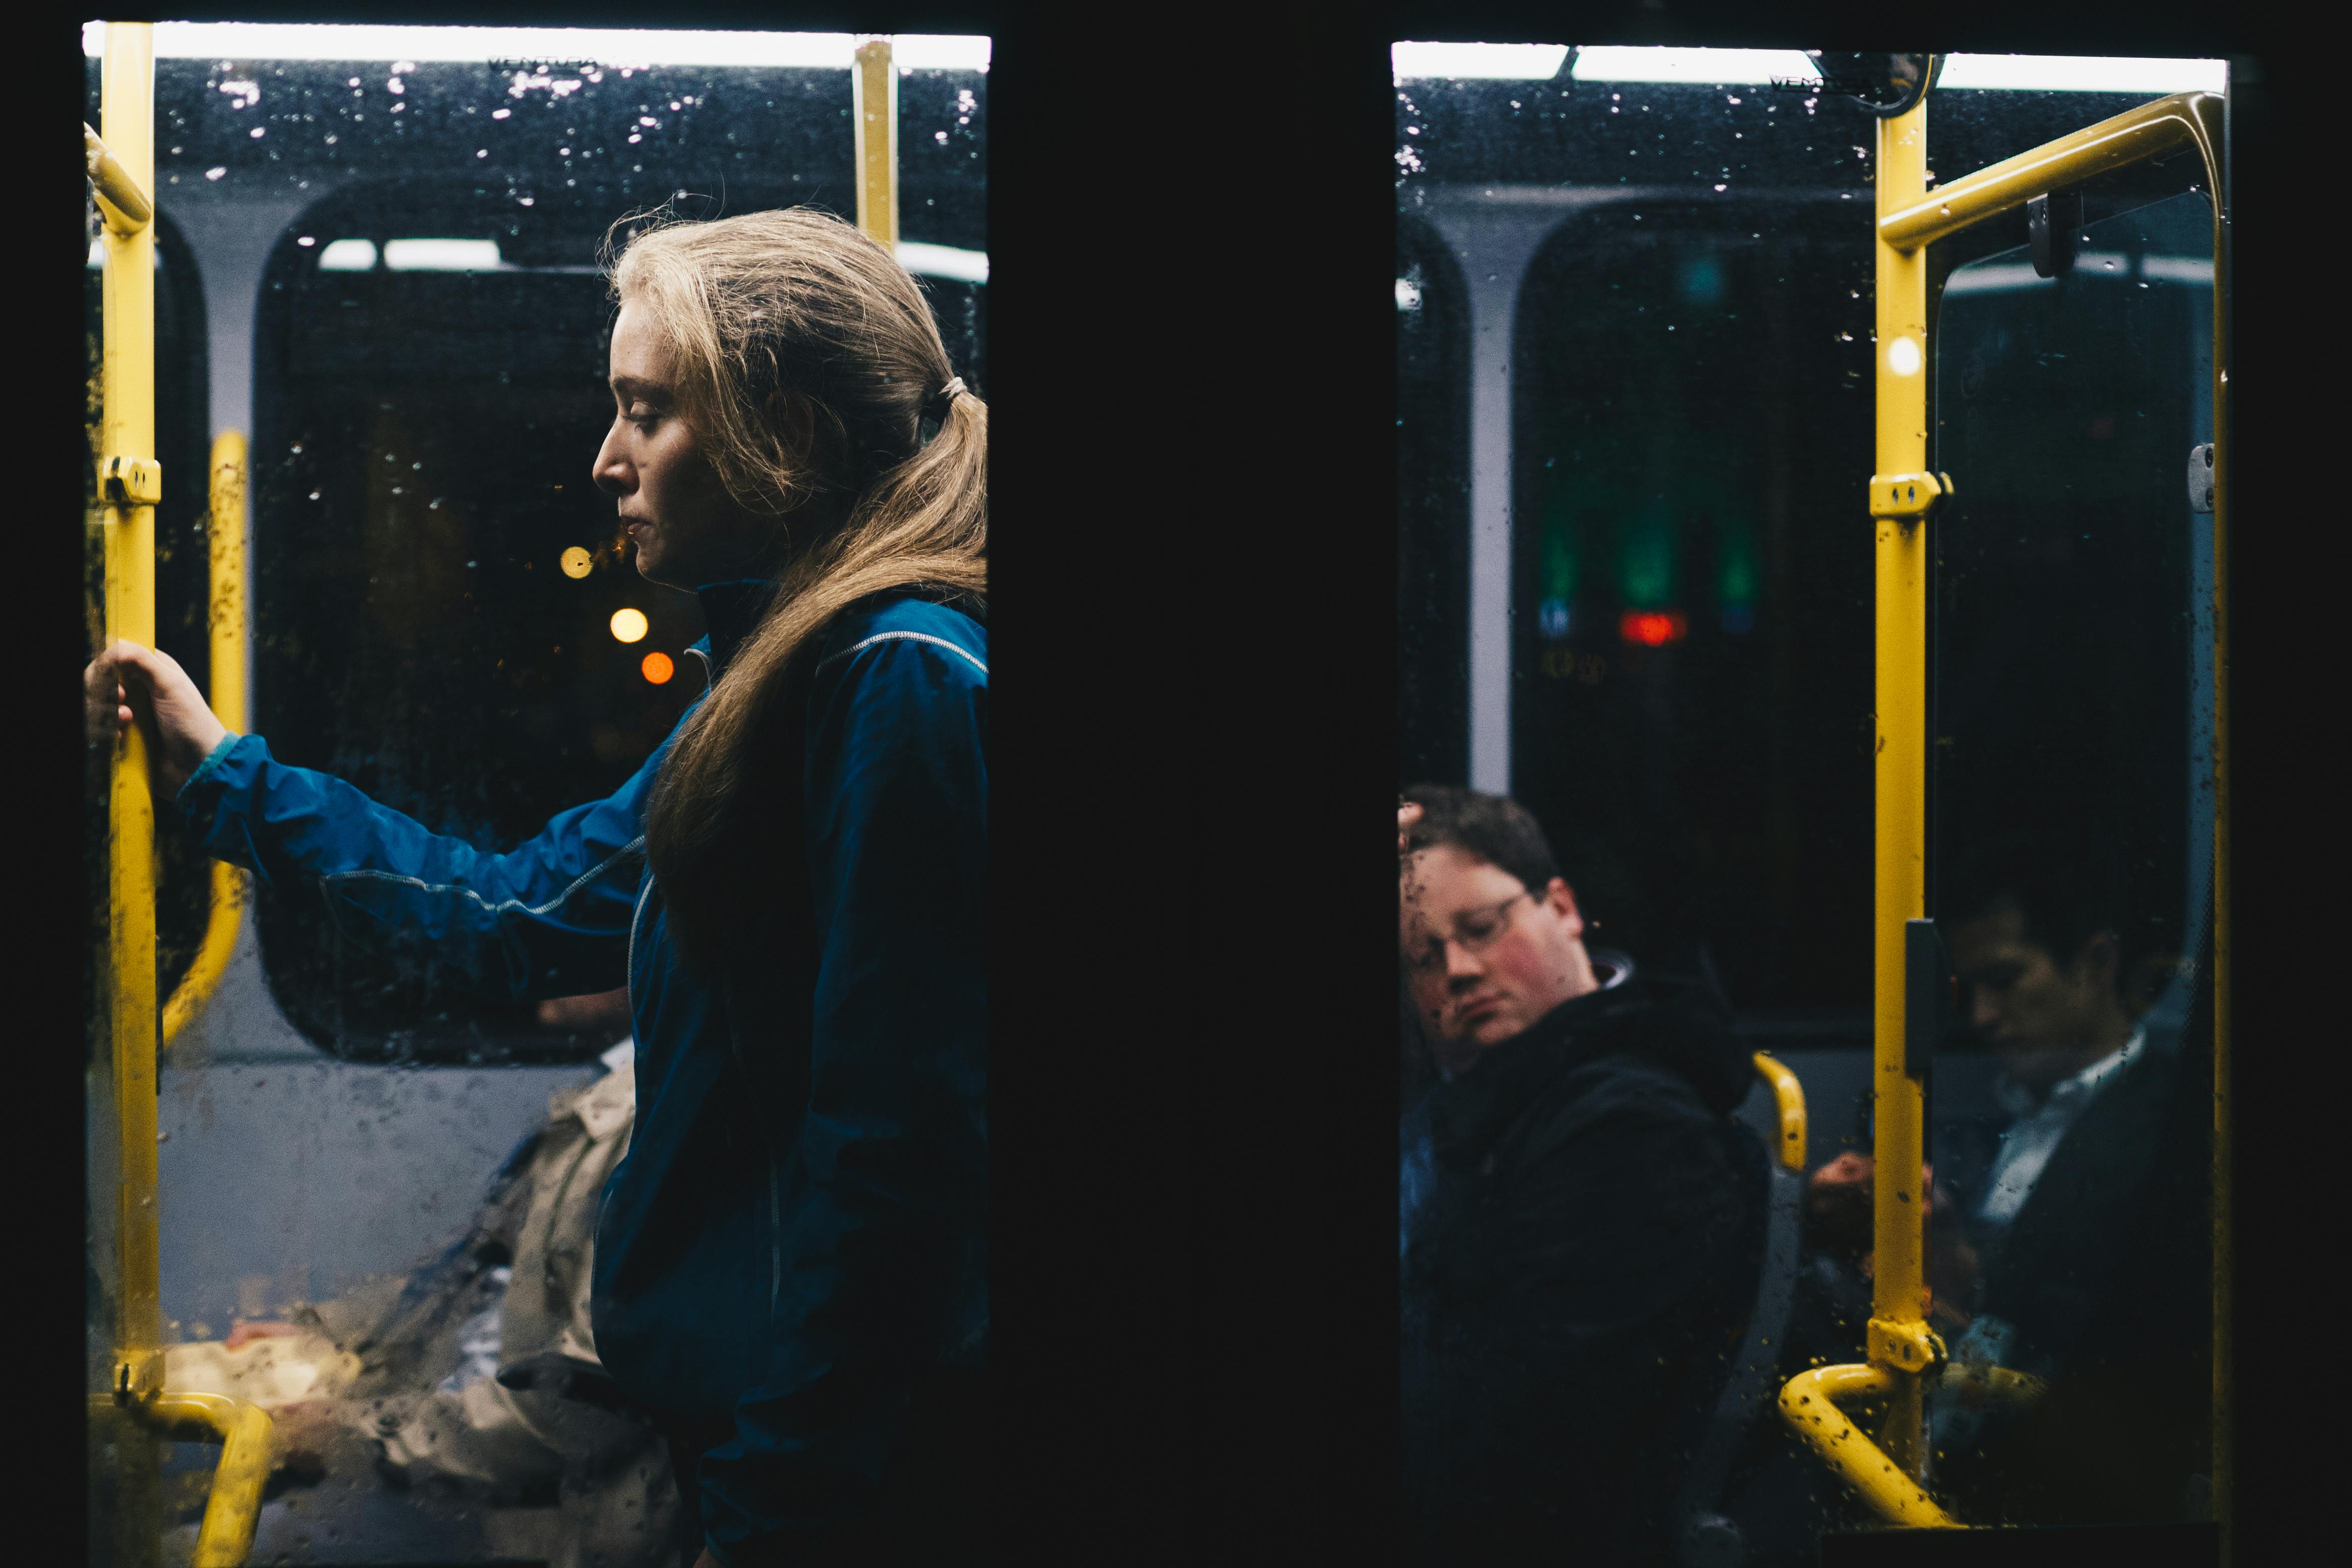 Photo by João Jesus from Pexels: https://www.pexels.com/photo/photo-of-a-woman-standing-inside-bus-808700/